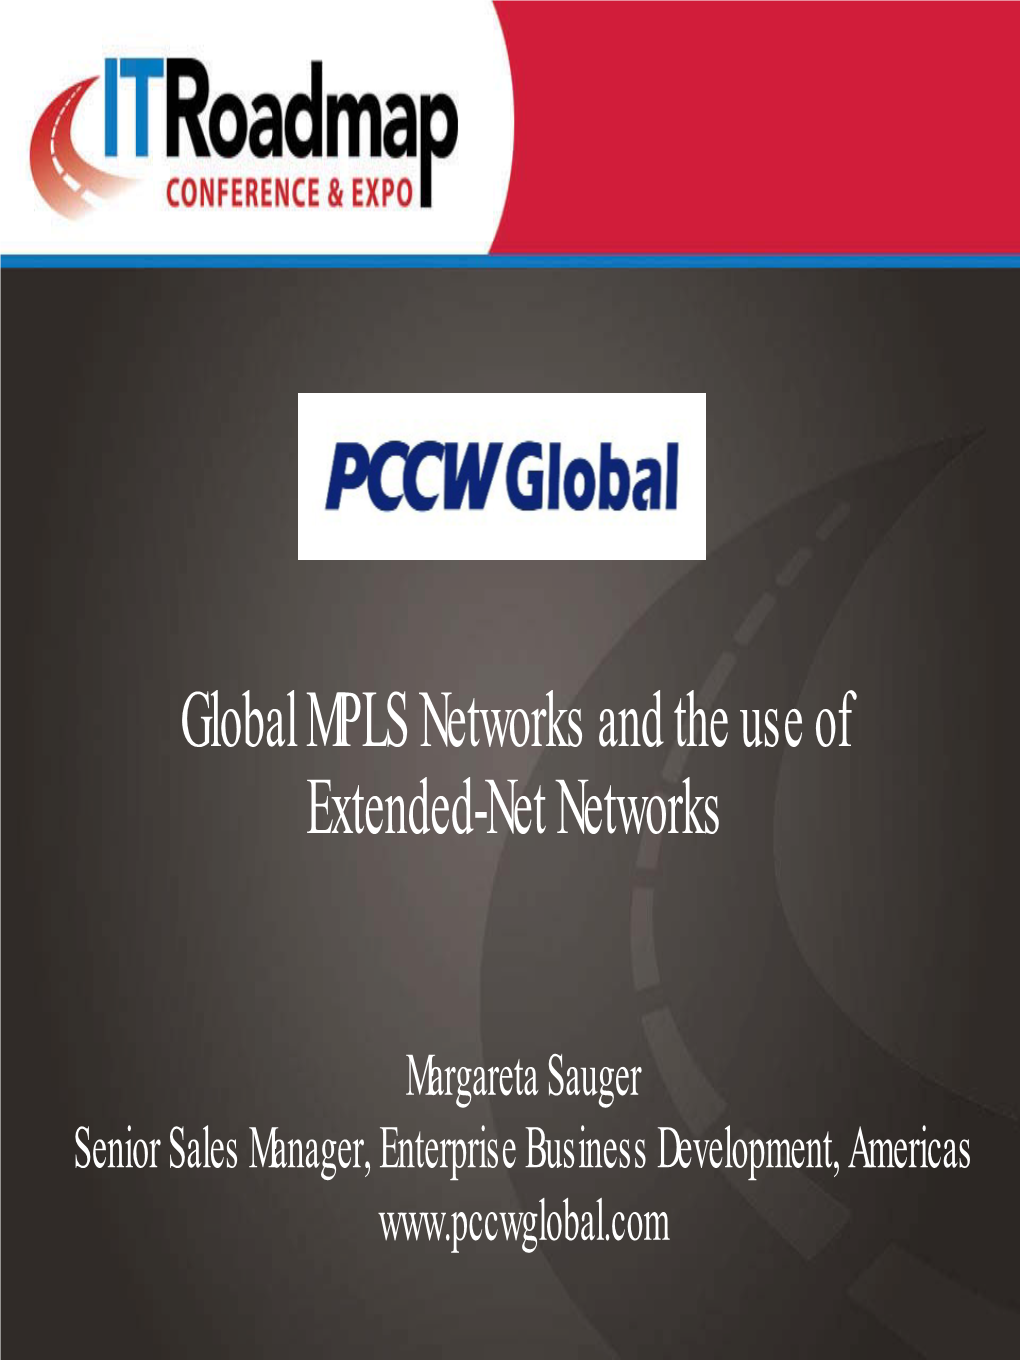 PCCW Global – Connected with Your World Company Overview